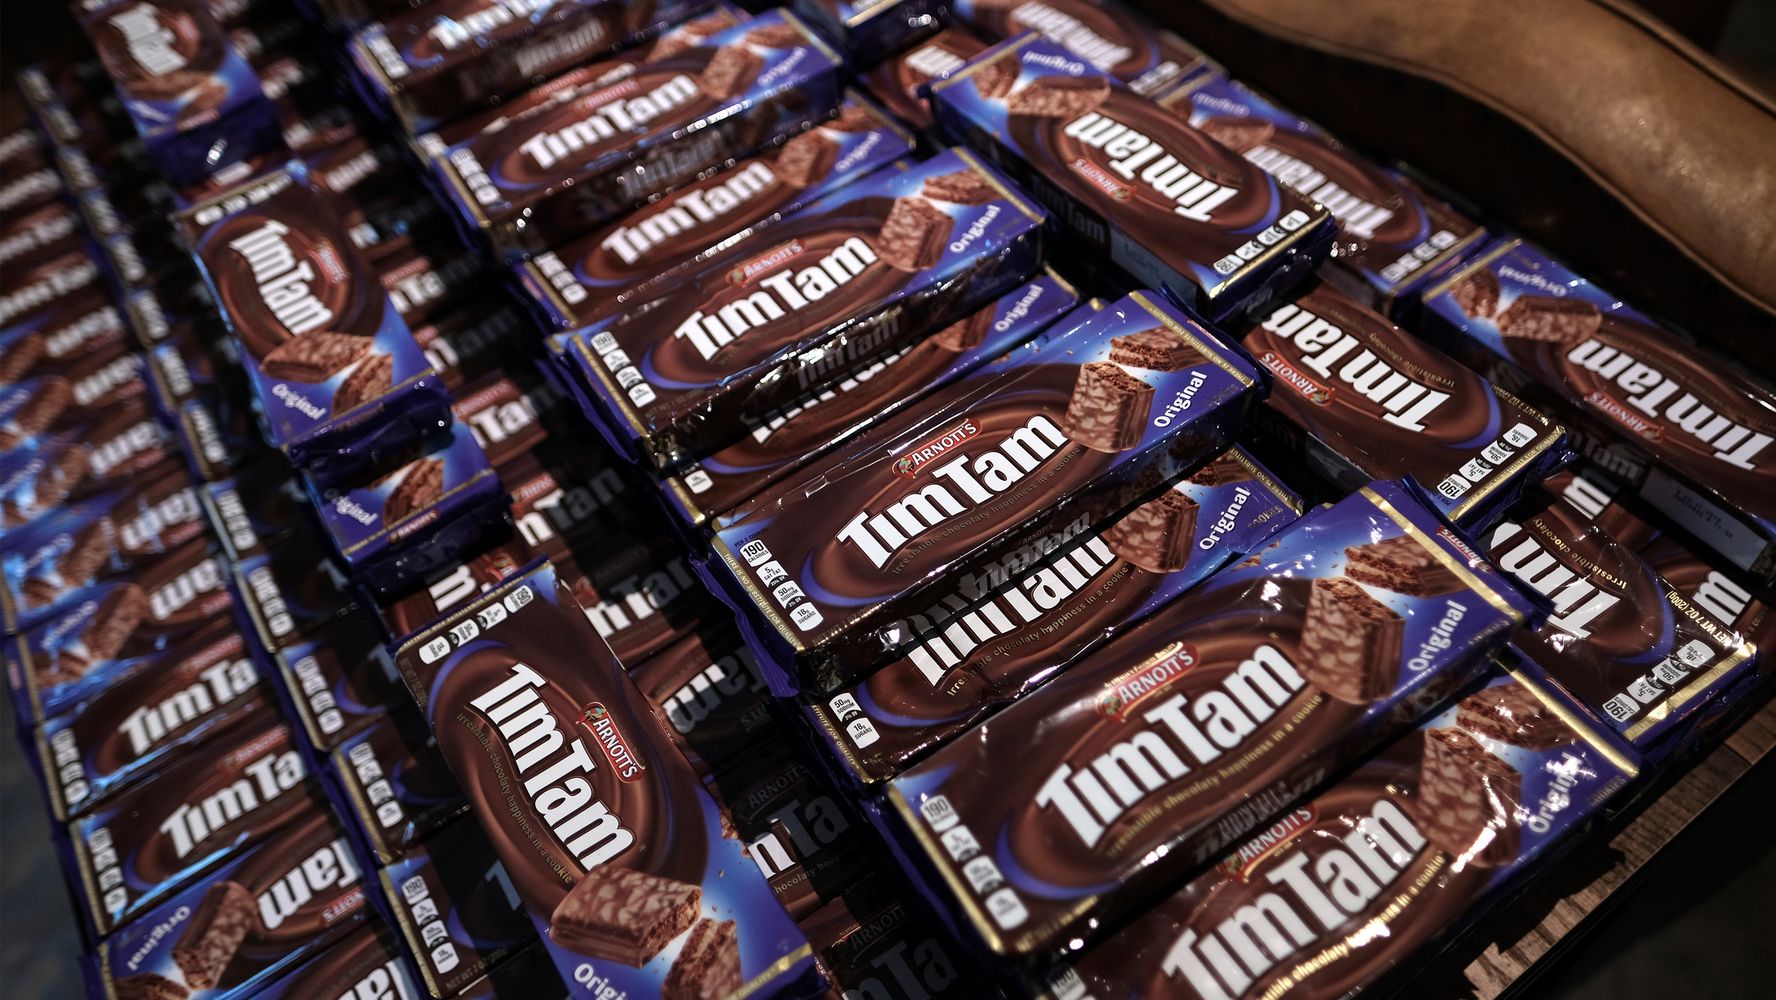 Tim Tams, Your Favorite Snack, Are Finally In US | HuffPost Life